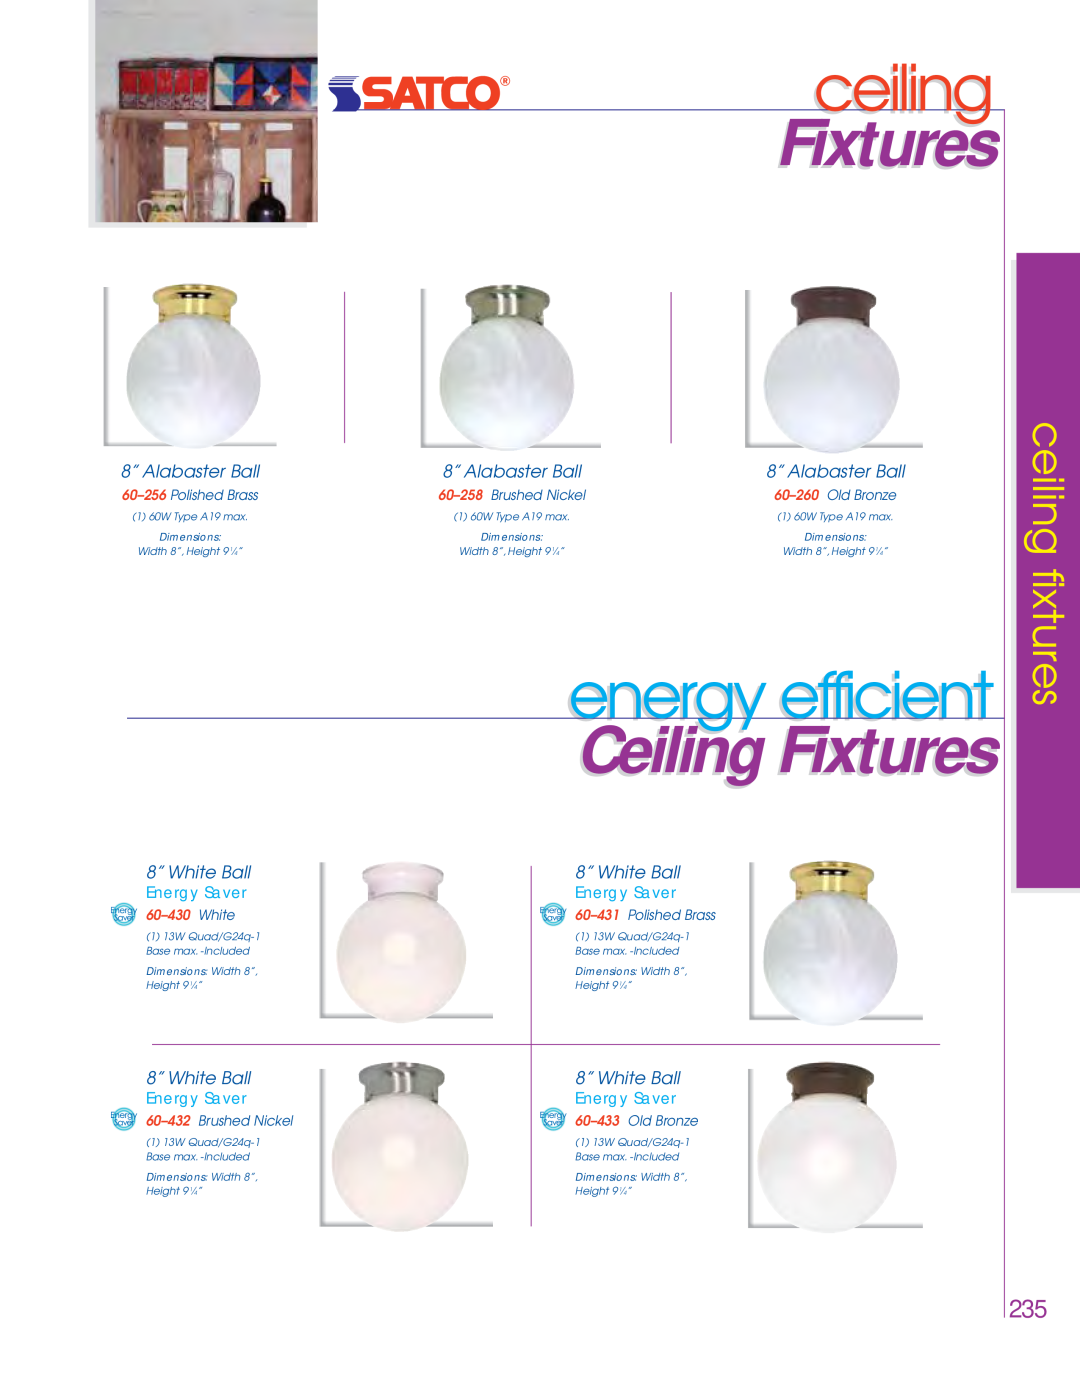 Satco Products 76-449, 76-693 ceiling, energy efficient, Ceiling Fixtures, fixtures, 8” Alabaster Ball, 8” White Ball 